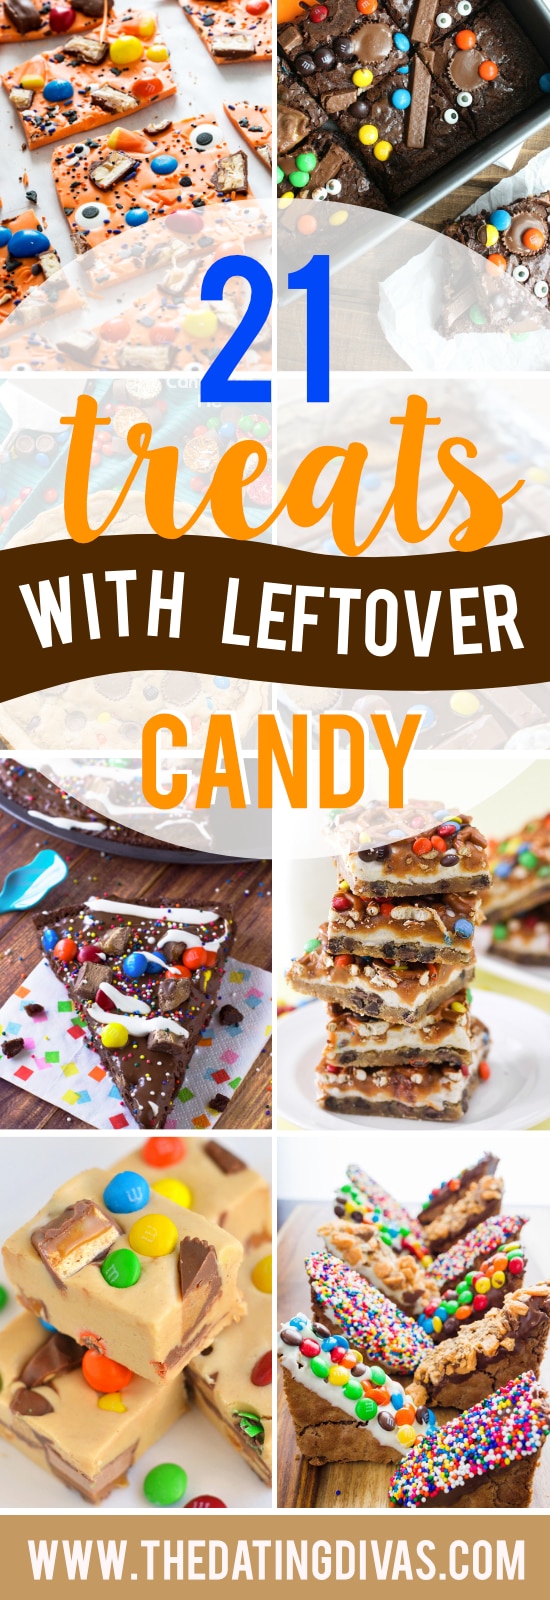 Treats to Make with Leftover Candy